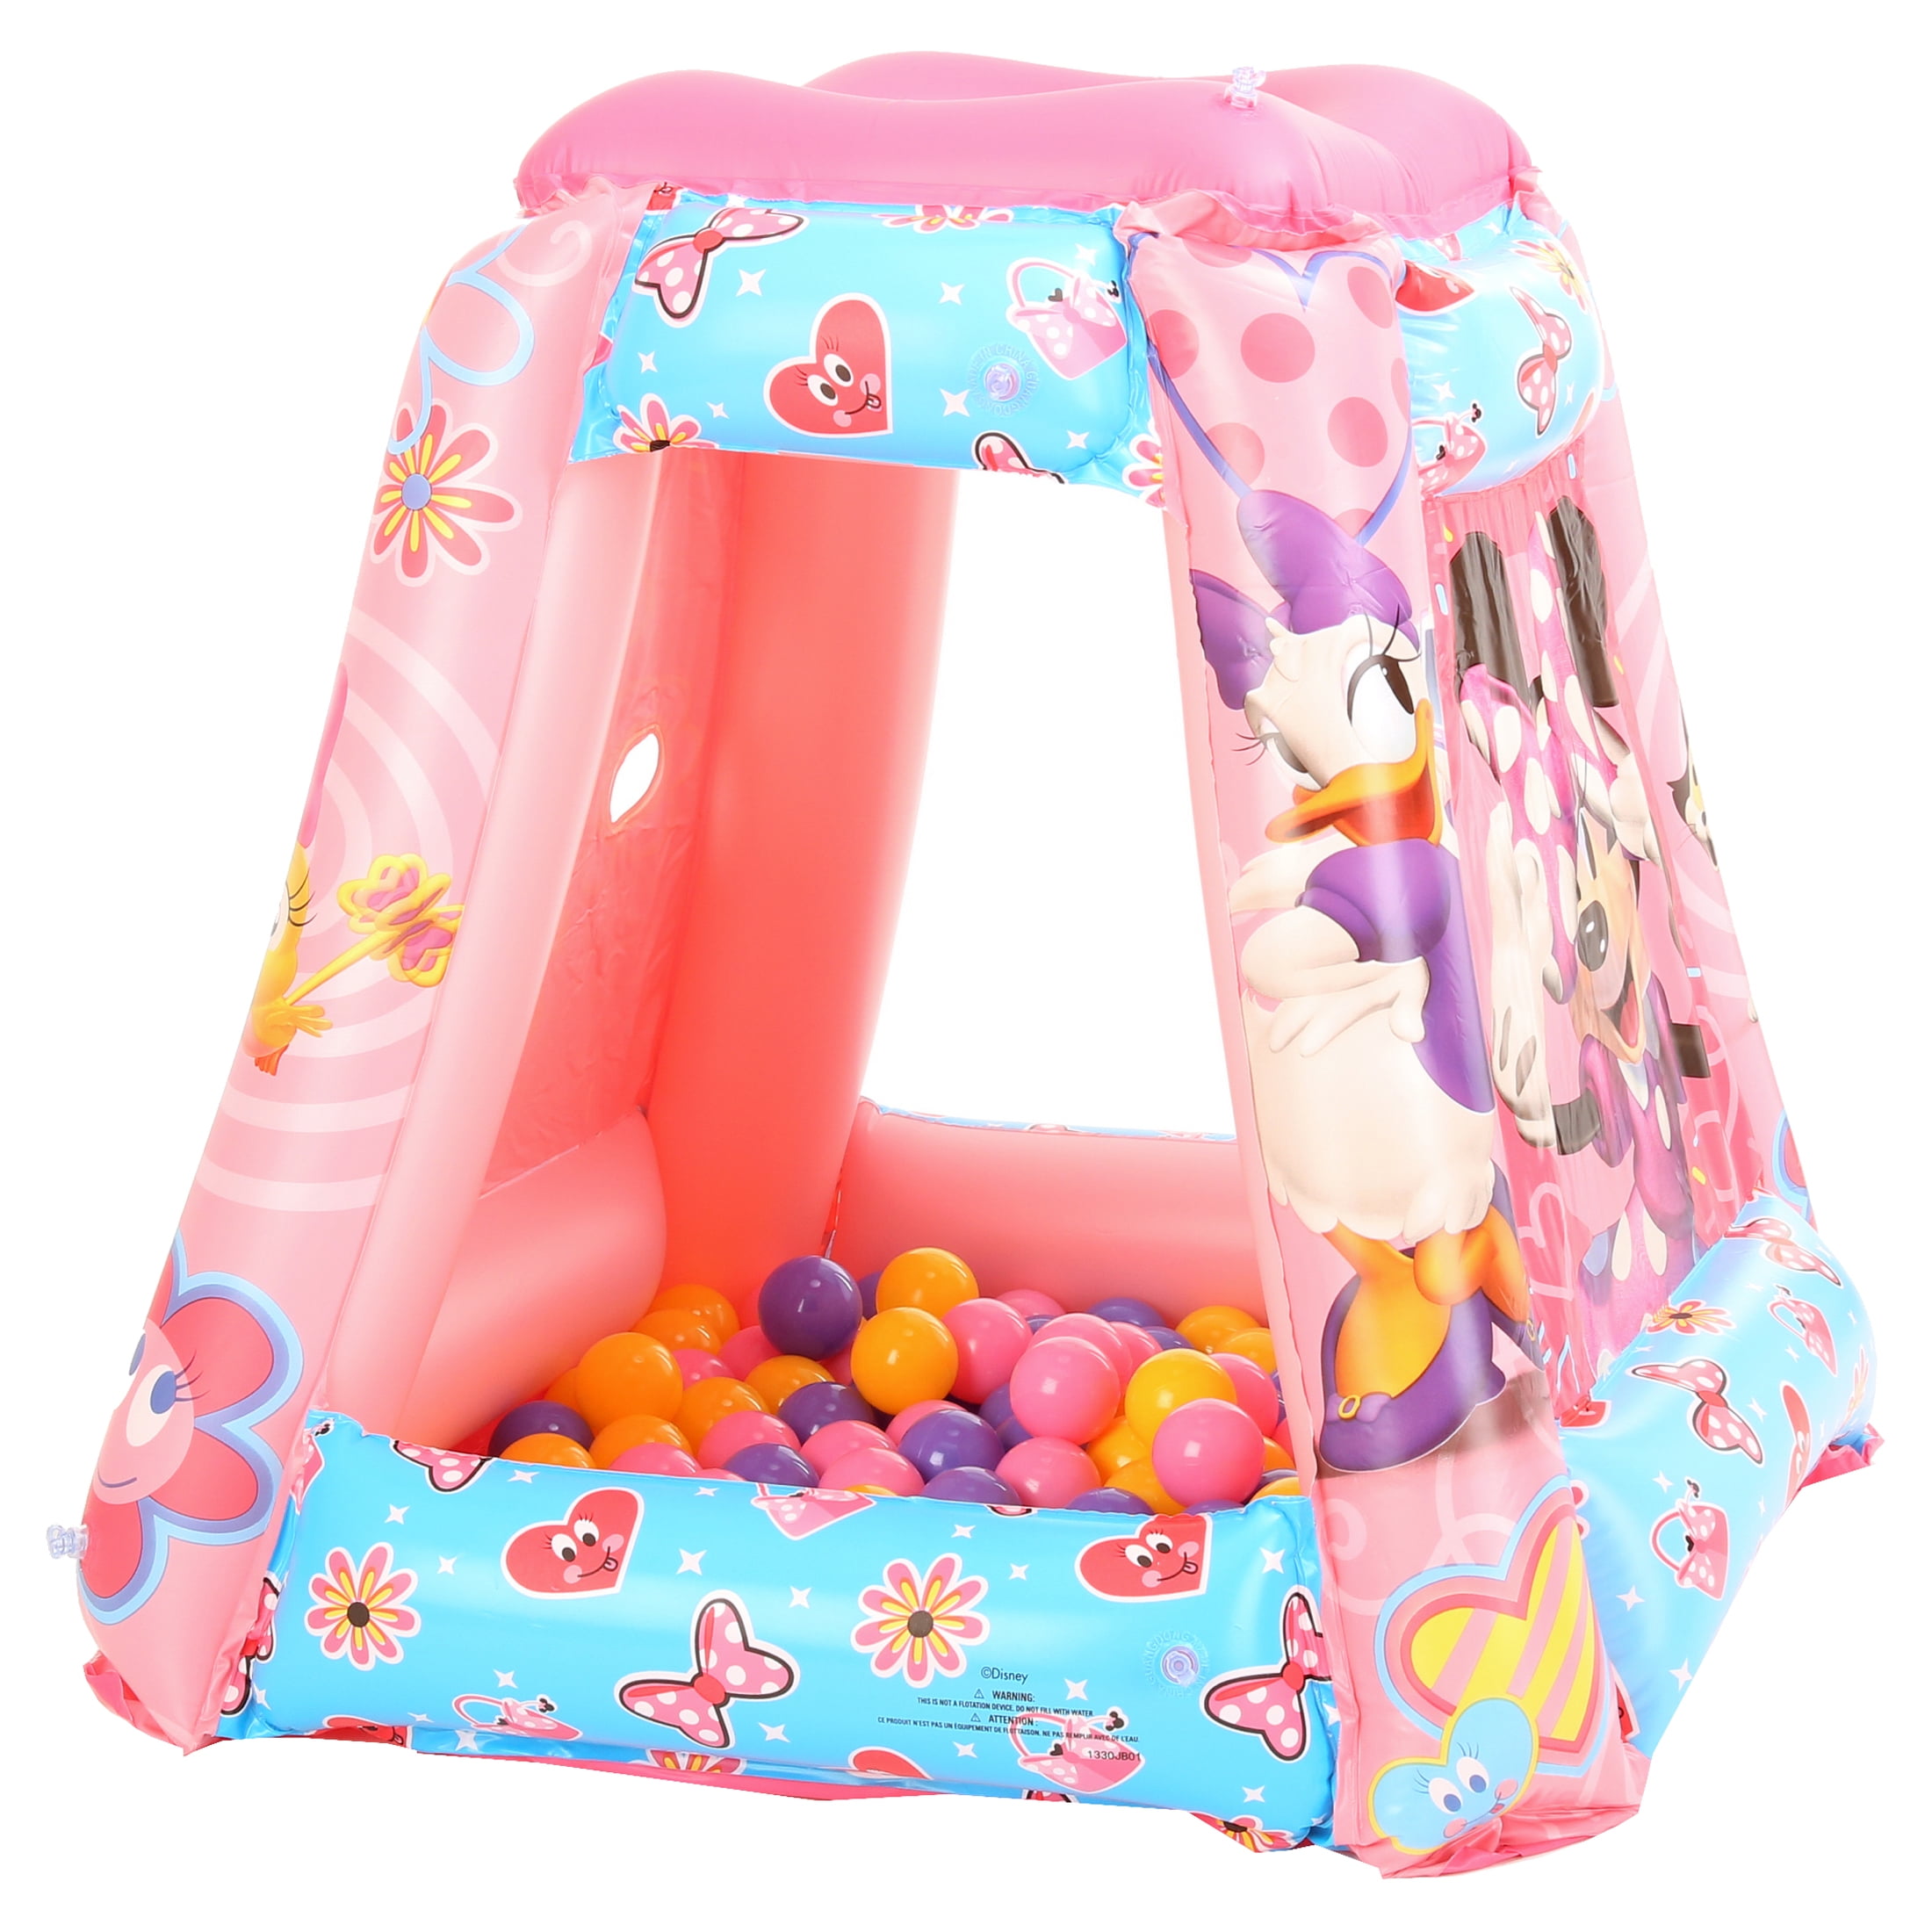 Details about  / Disney Minnie Mouse Inflatable Playland Ball Pit Including 20 Balls For Baby Toy